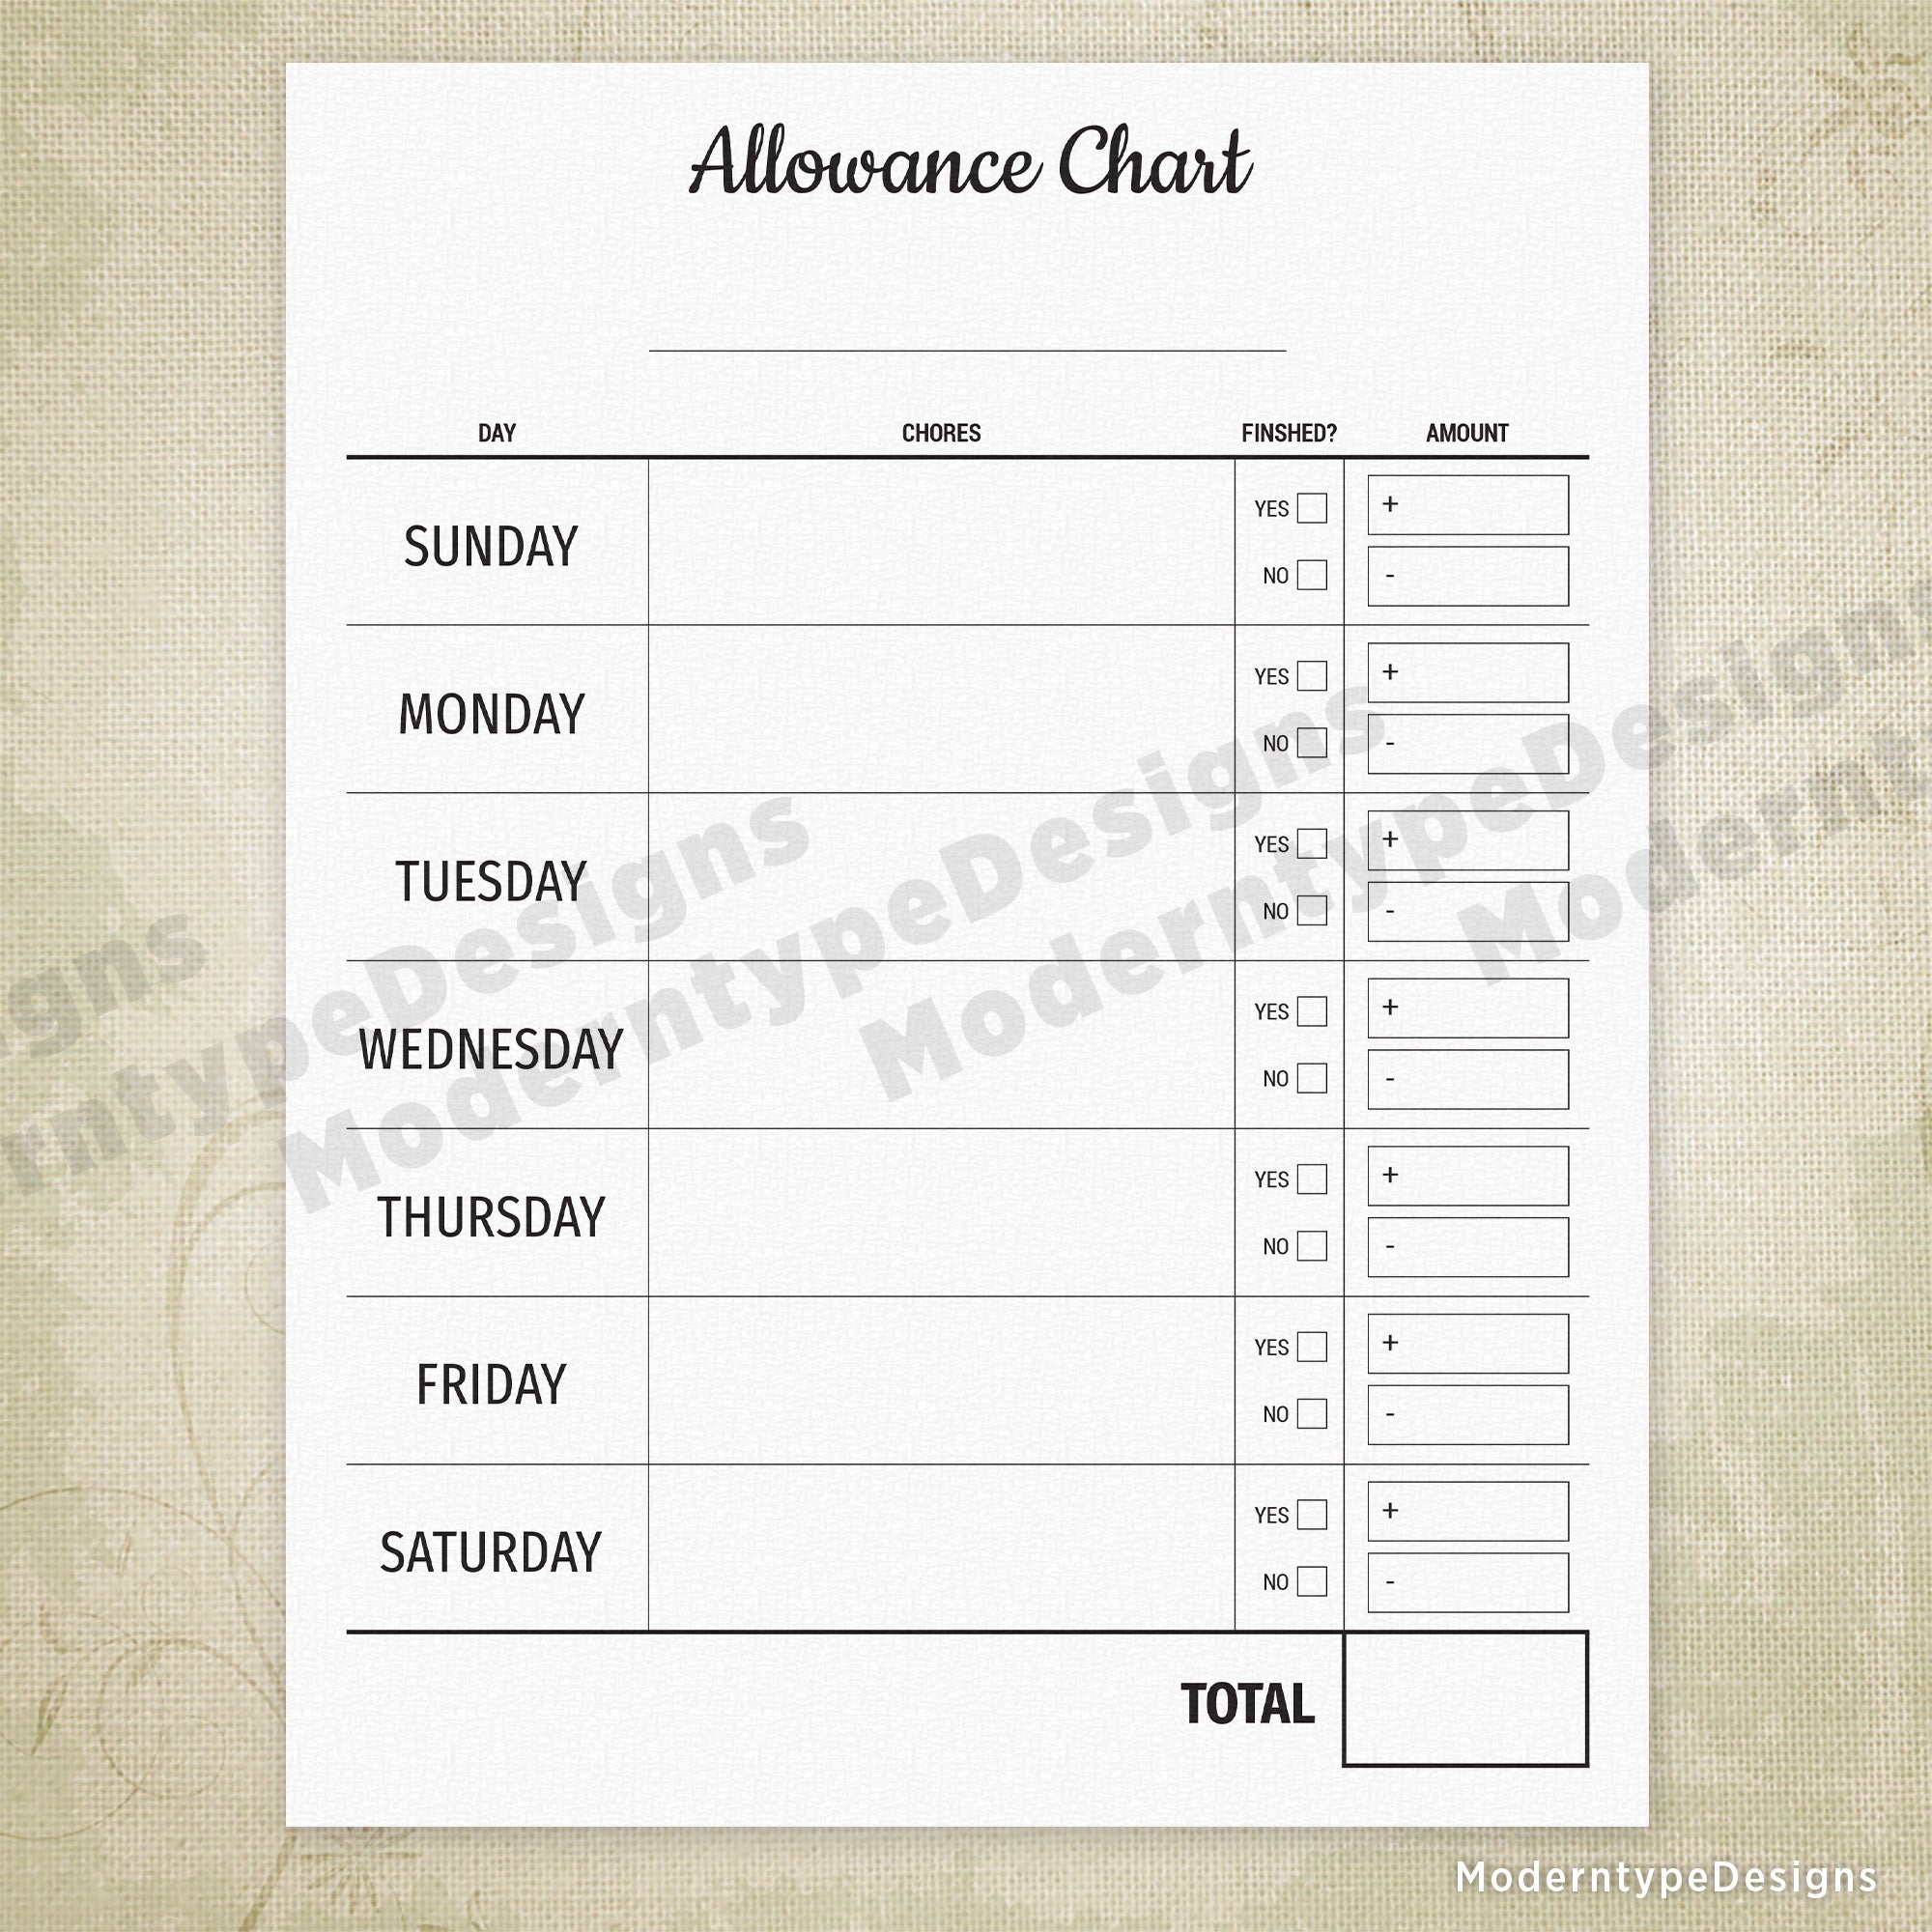 Allowance Chart Printable Form with Penalties